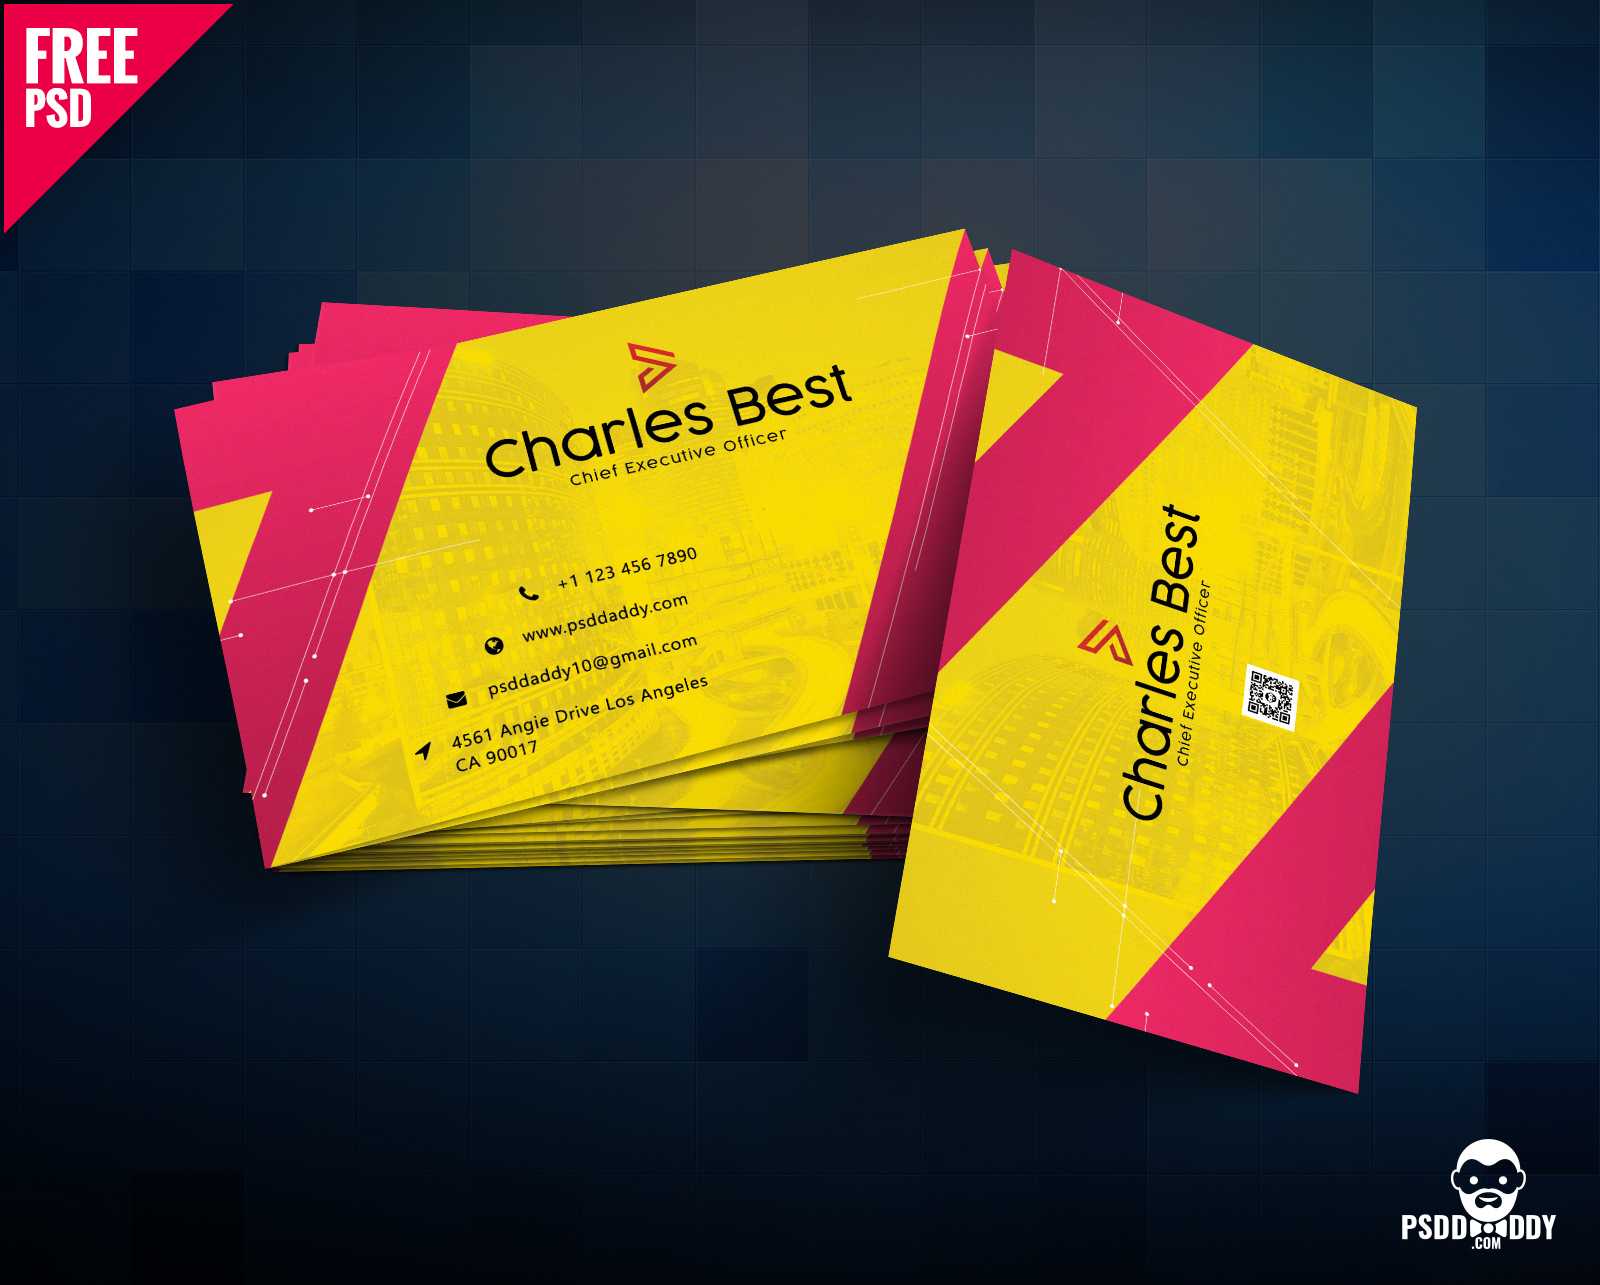 Download] Creative Business Card Free Psd | Psddaddy Regarding Free Complimentary Card Templates